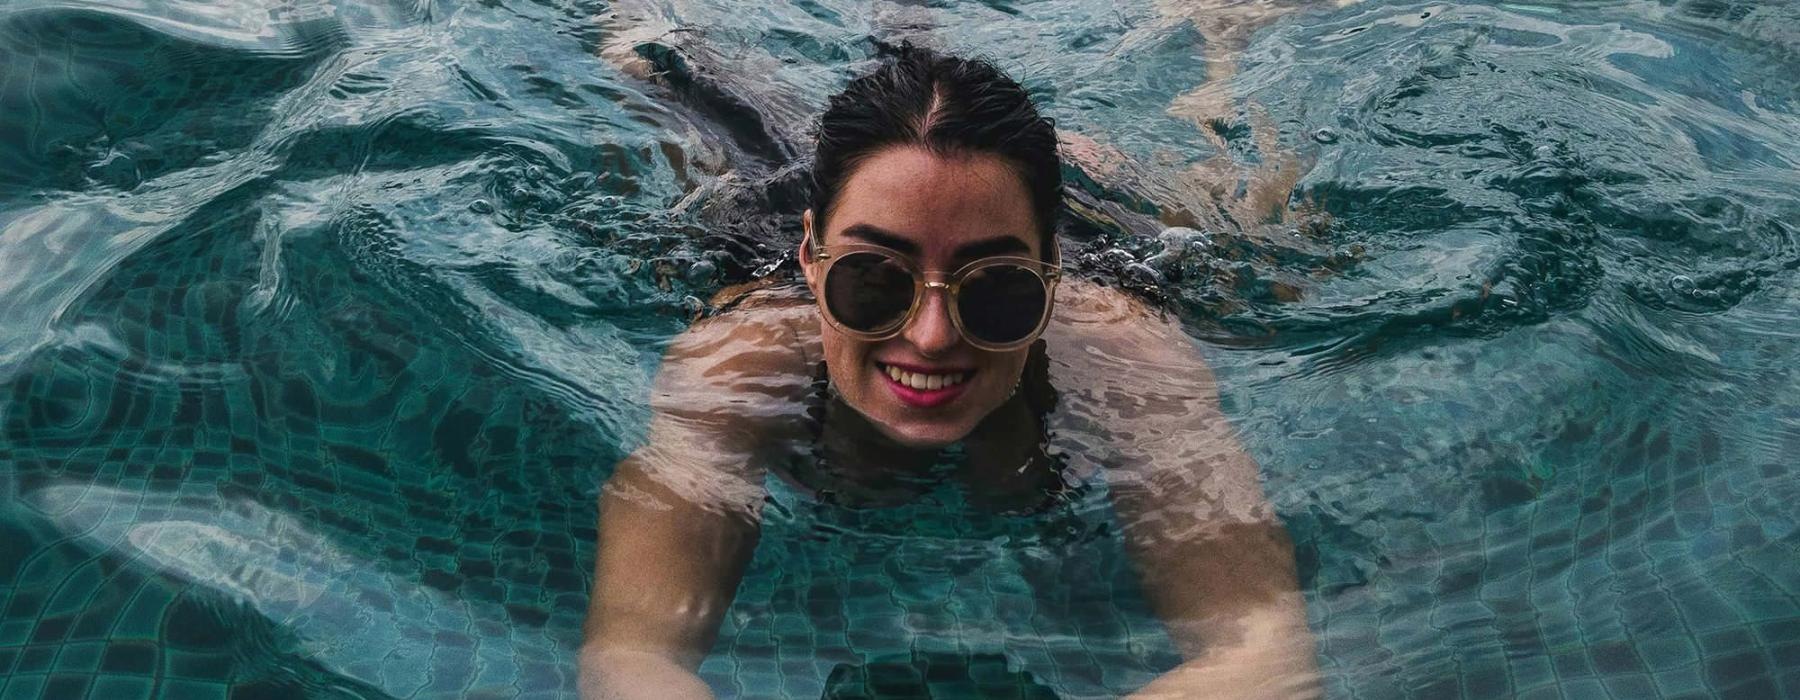 woman with sunglasses swims in pool